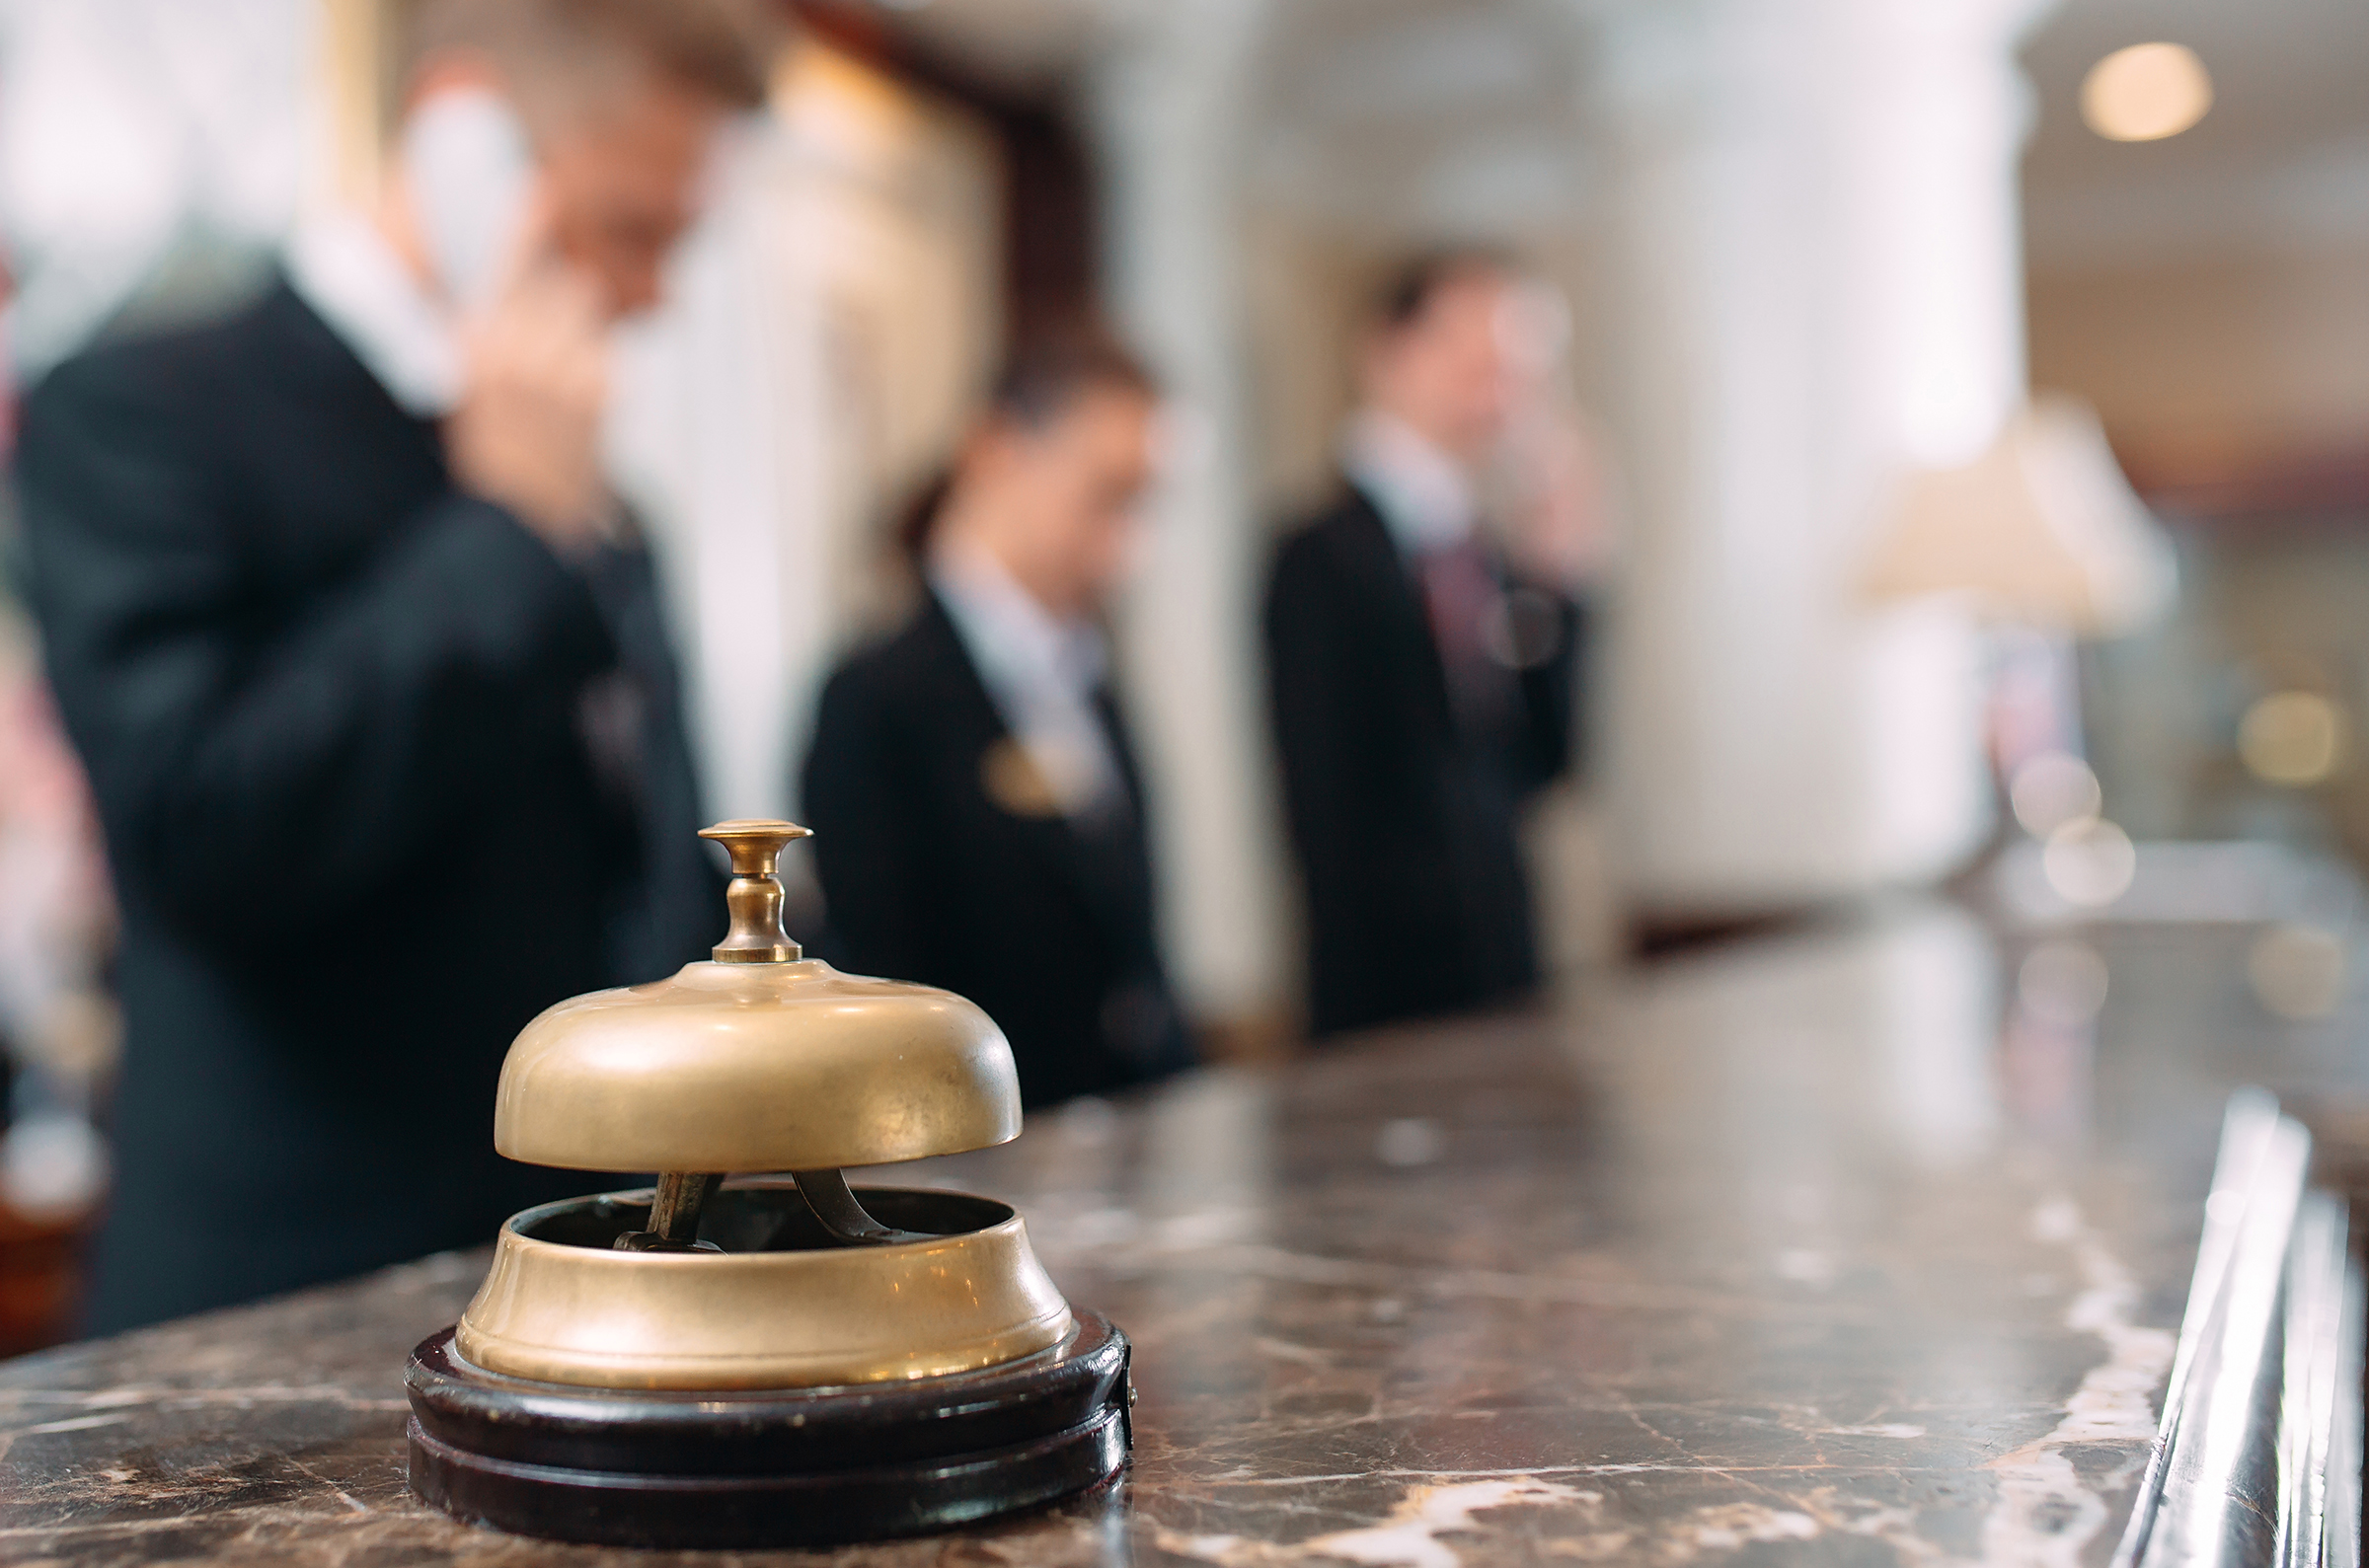 Hotel staff using phones at the reception desk.